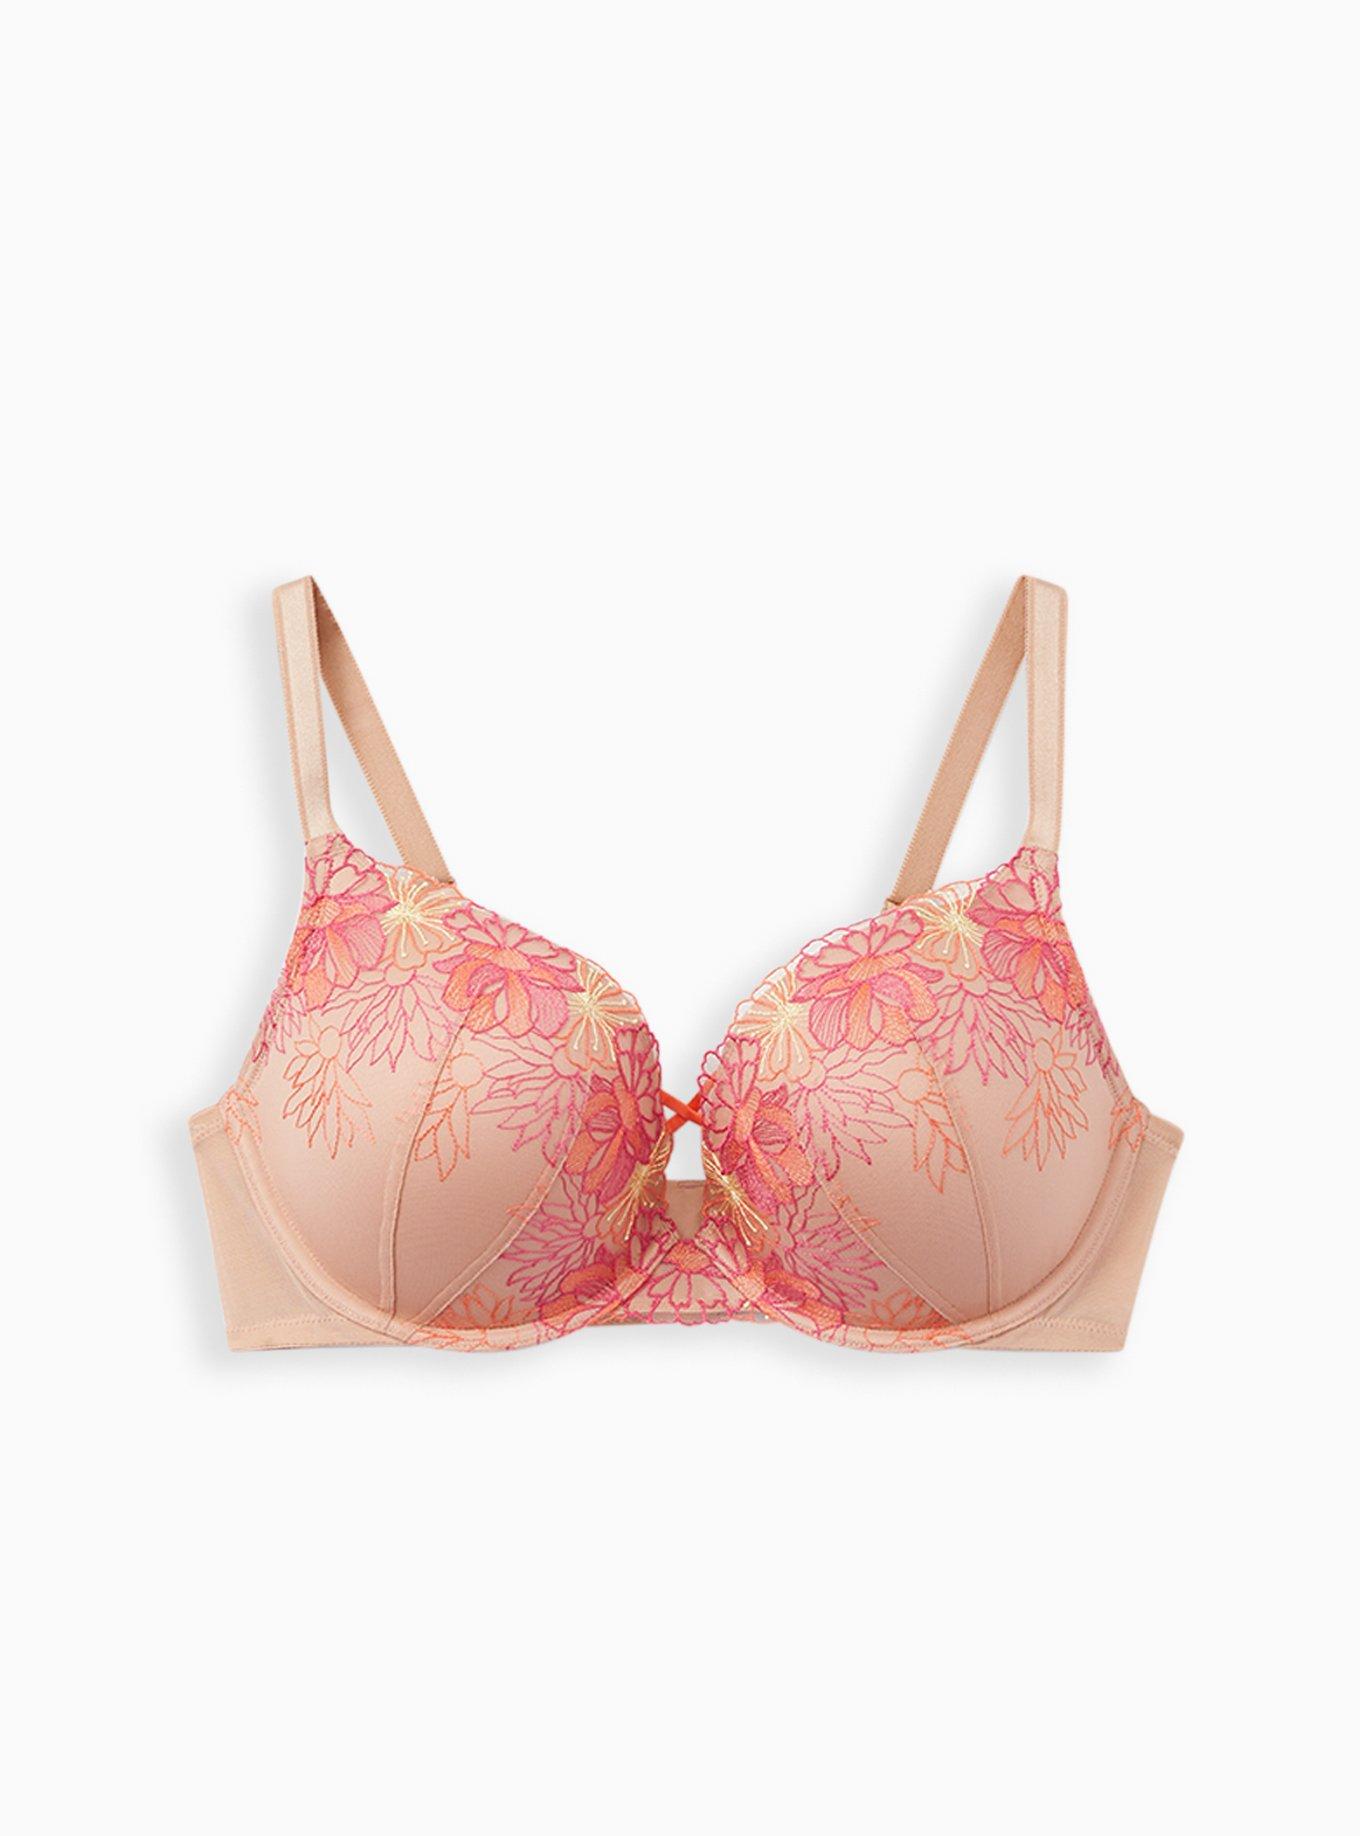 Buy Victoria's Secret Front Close Push Up Plunge Bra from the